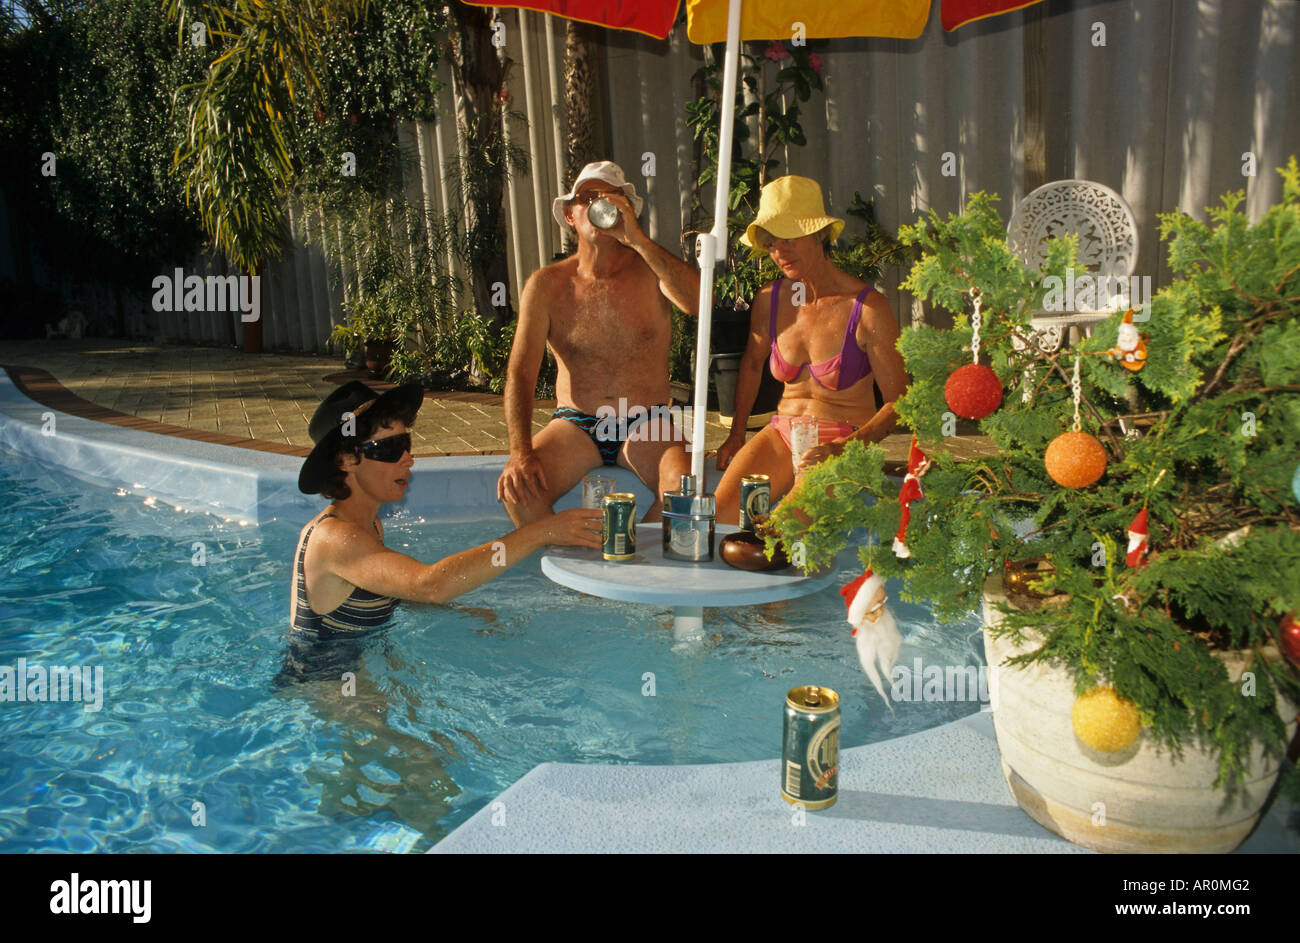 Australian Christmas, family in pool, Australien, Hot summer Christmas in southern hemisphere, family in pool at home, Weihnacht Stock Photo